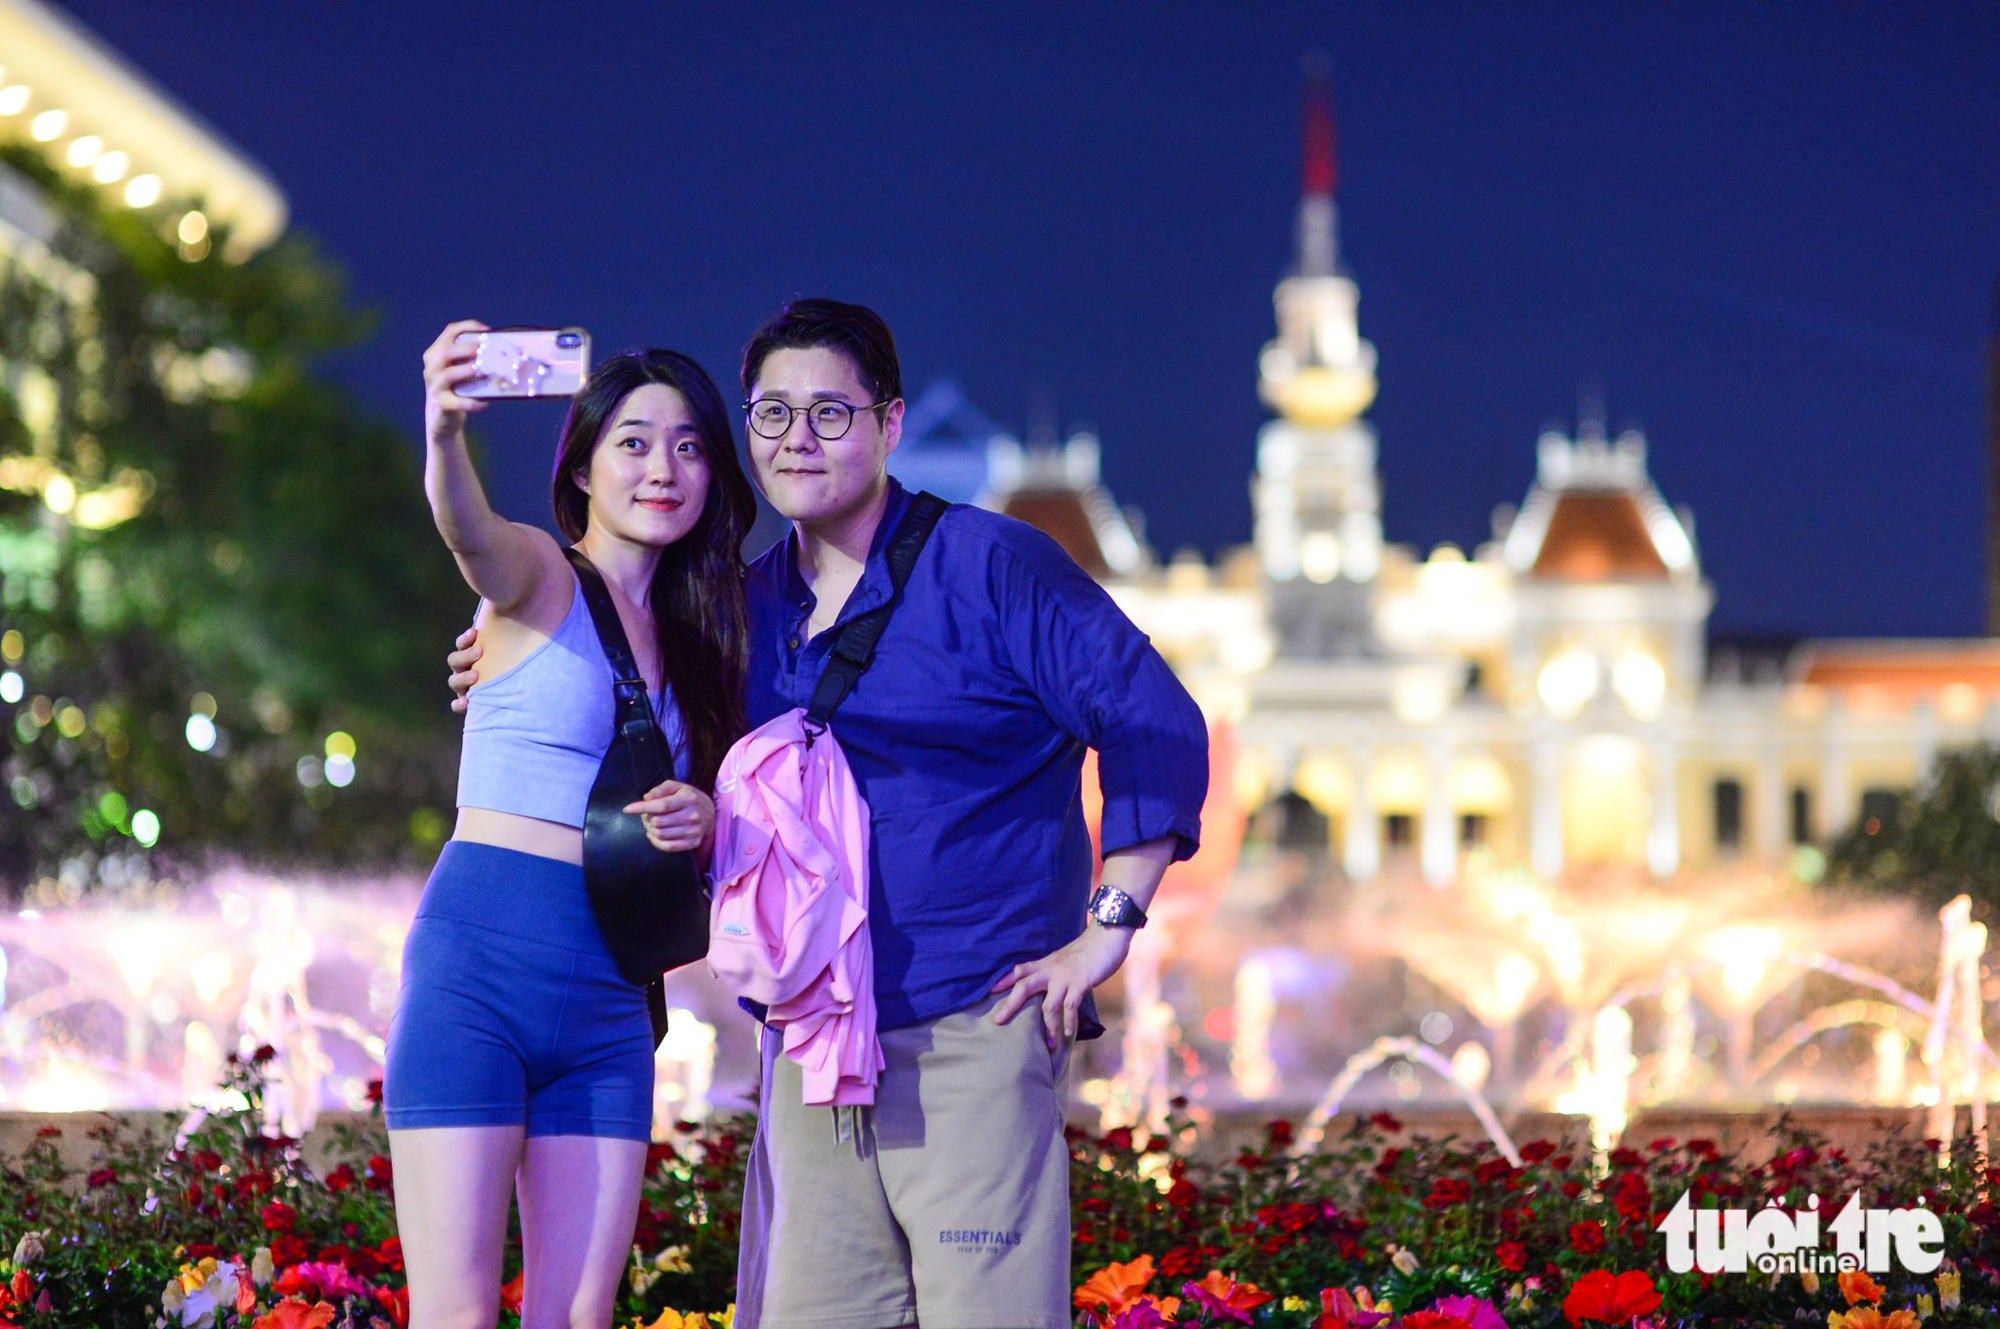 South Korean tourists take a photo in the Nguyen Hue pedestrian zone in District 1, Ho Chi Minh City. Photo: Quang Dinh / Tuoi Tre